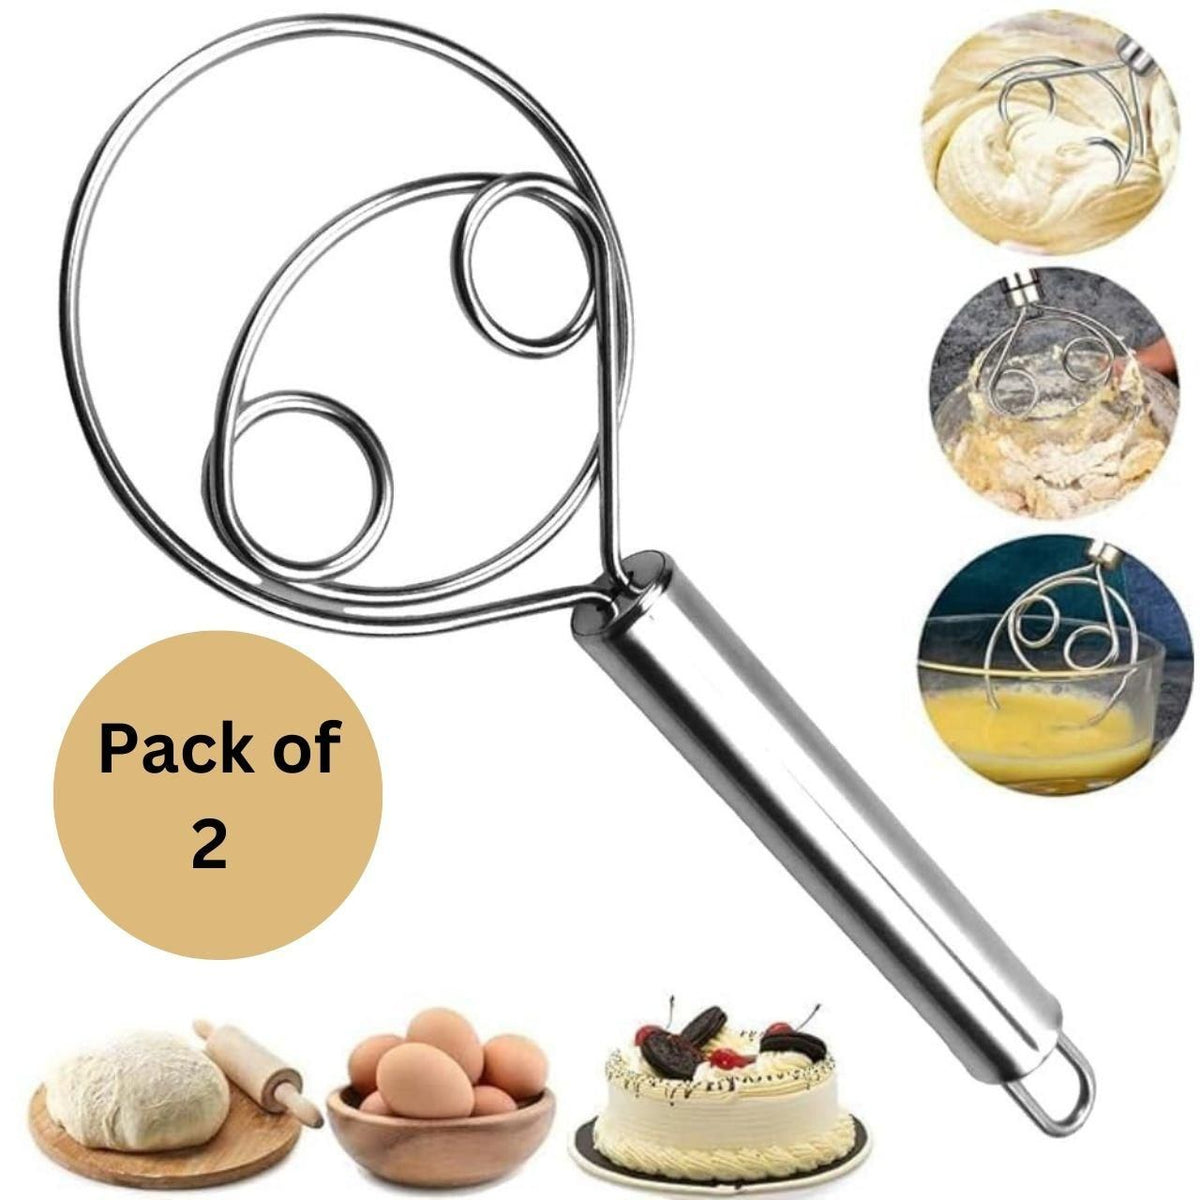 Dishwasher Safe Danish Dough Whisk, Stainless Steel Bread Whisk, Bread Mixer Making Tools  (Pack of 2)